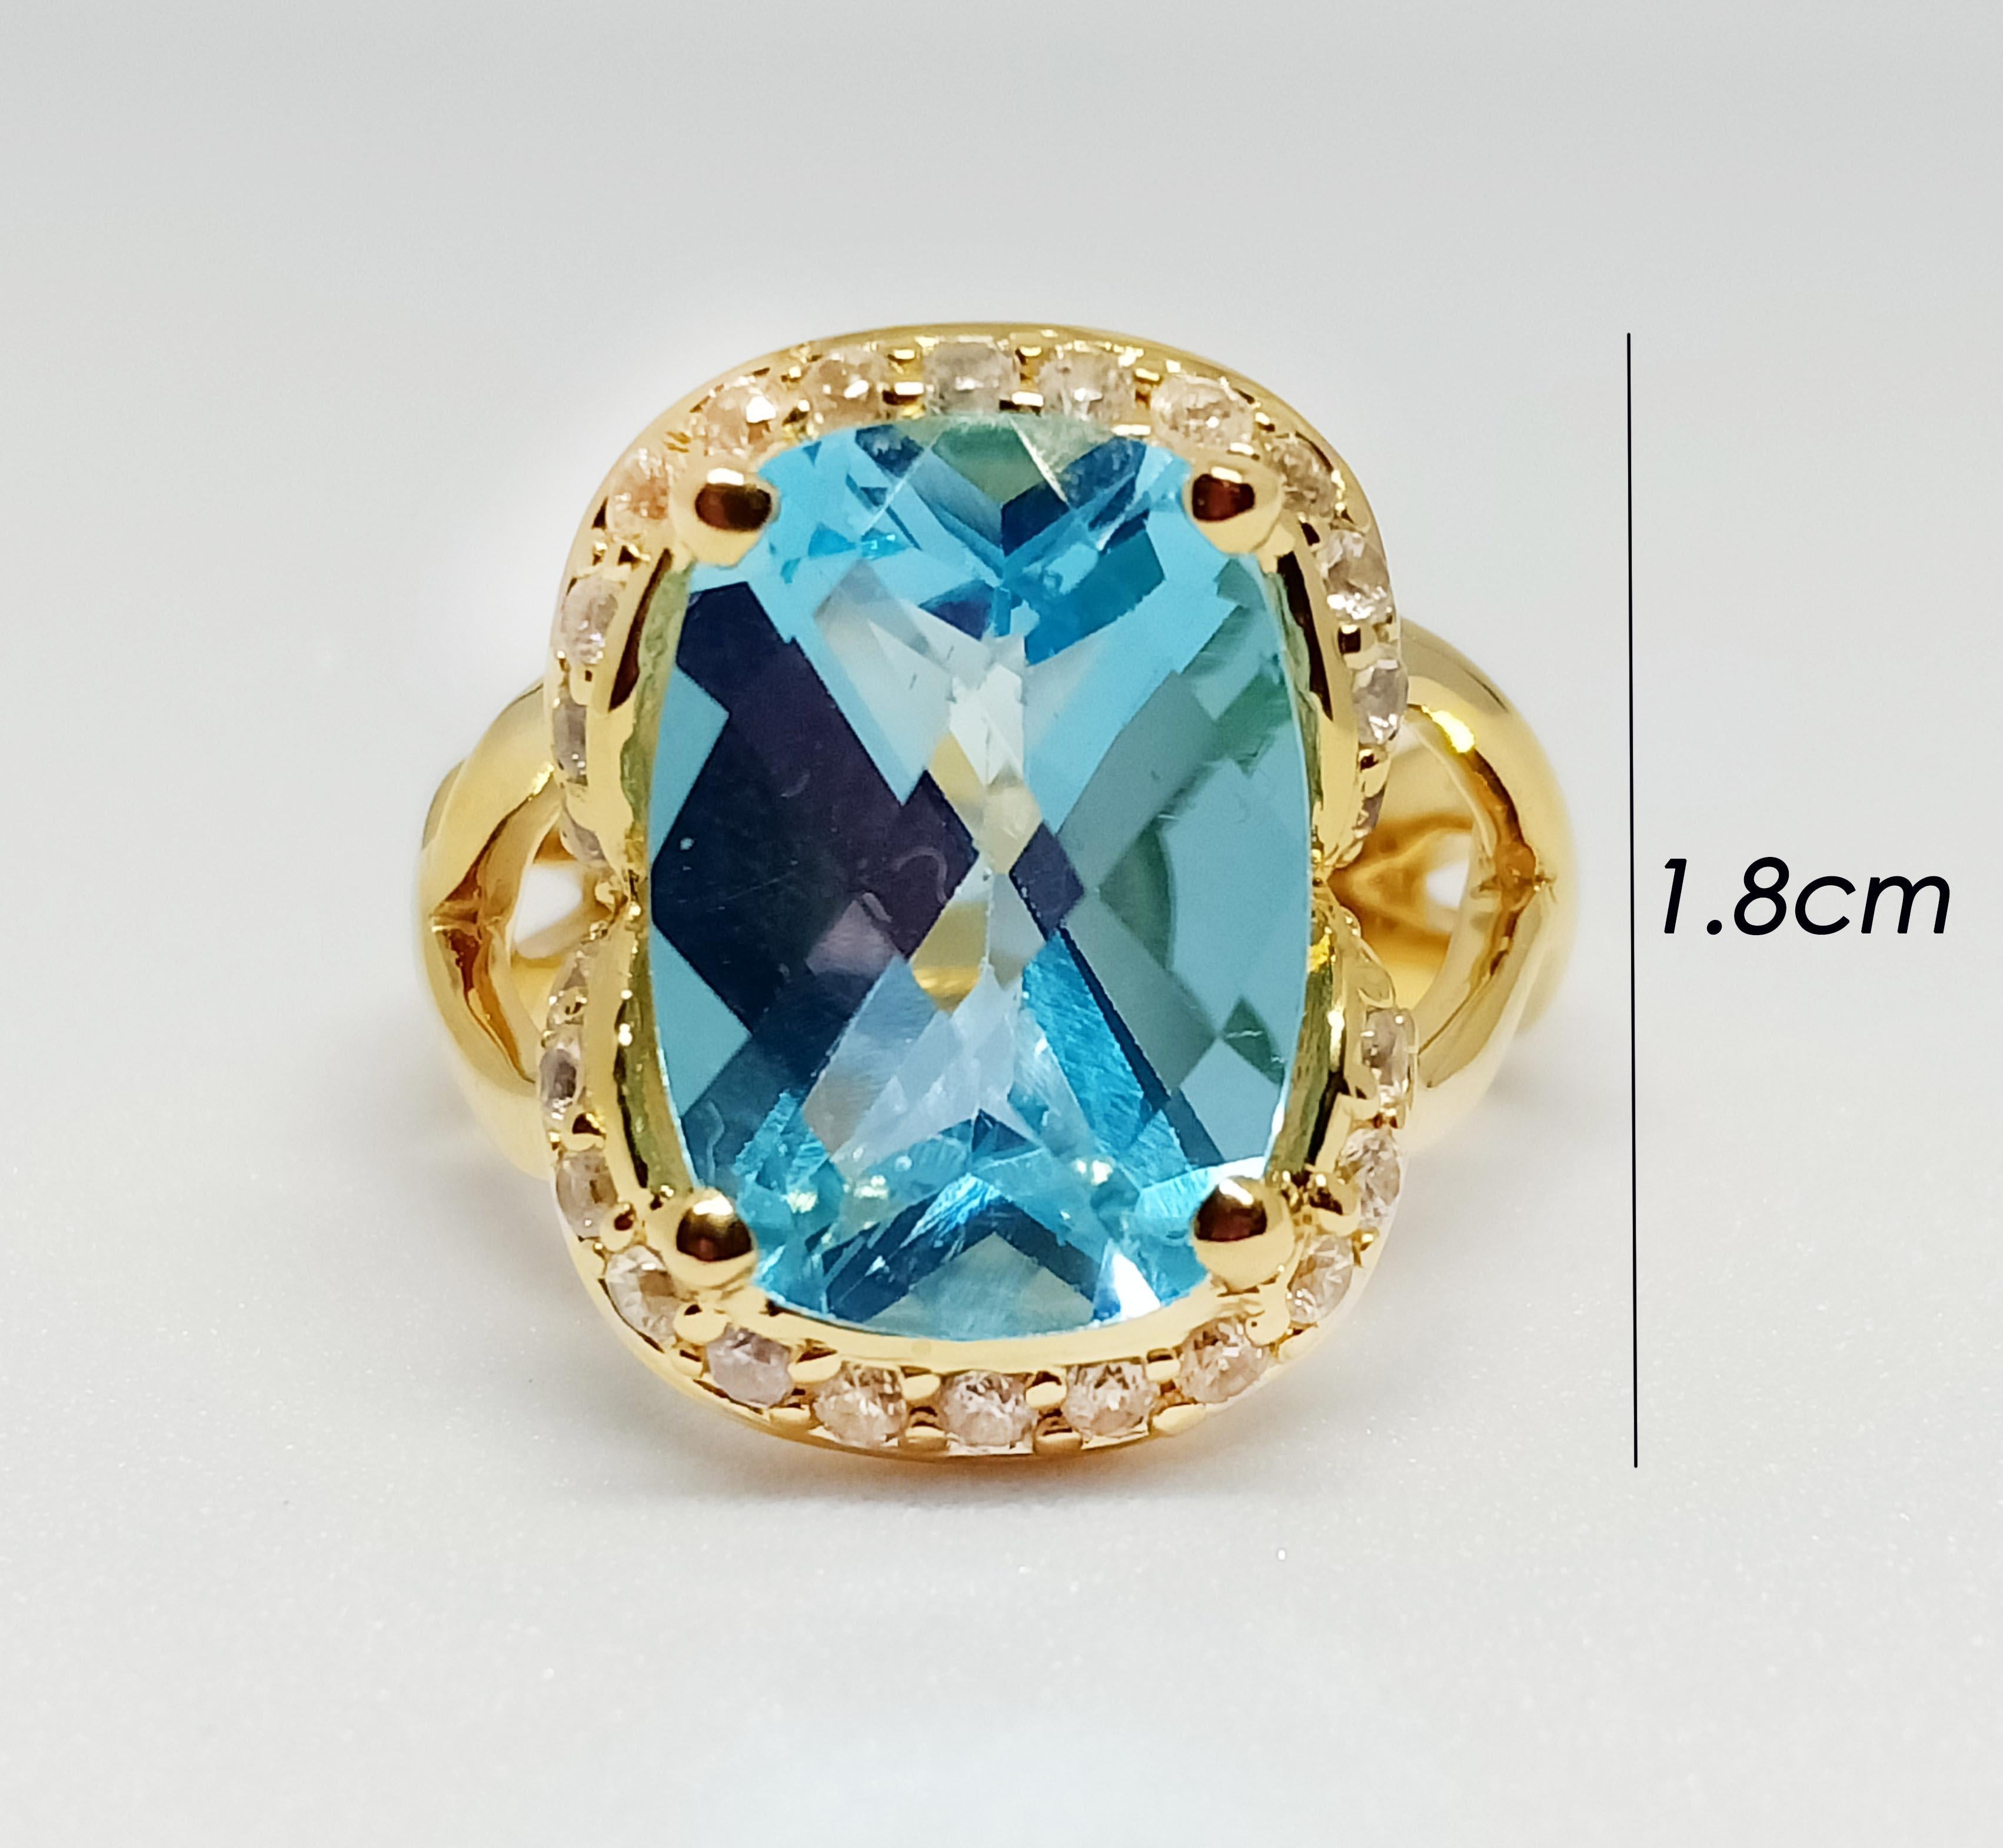 Blue topaz cushion checkerboard size 14x10mm.  7.60cts
White Zircon 26 pcs. Pave setting
18K Gold Plated over stering silver 925
Cocktail ring. 
